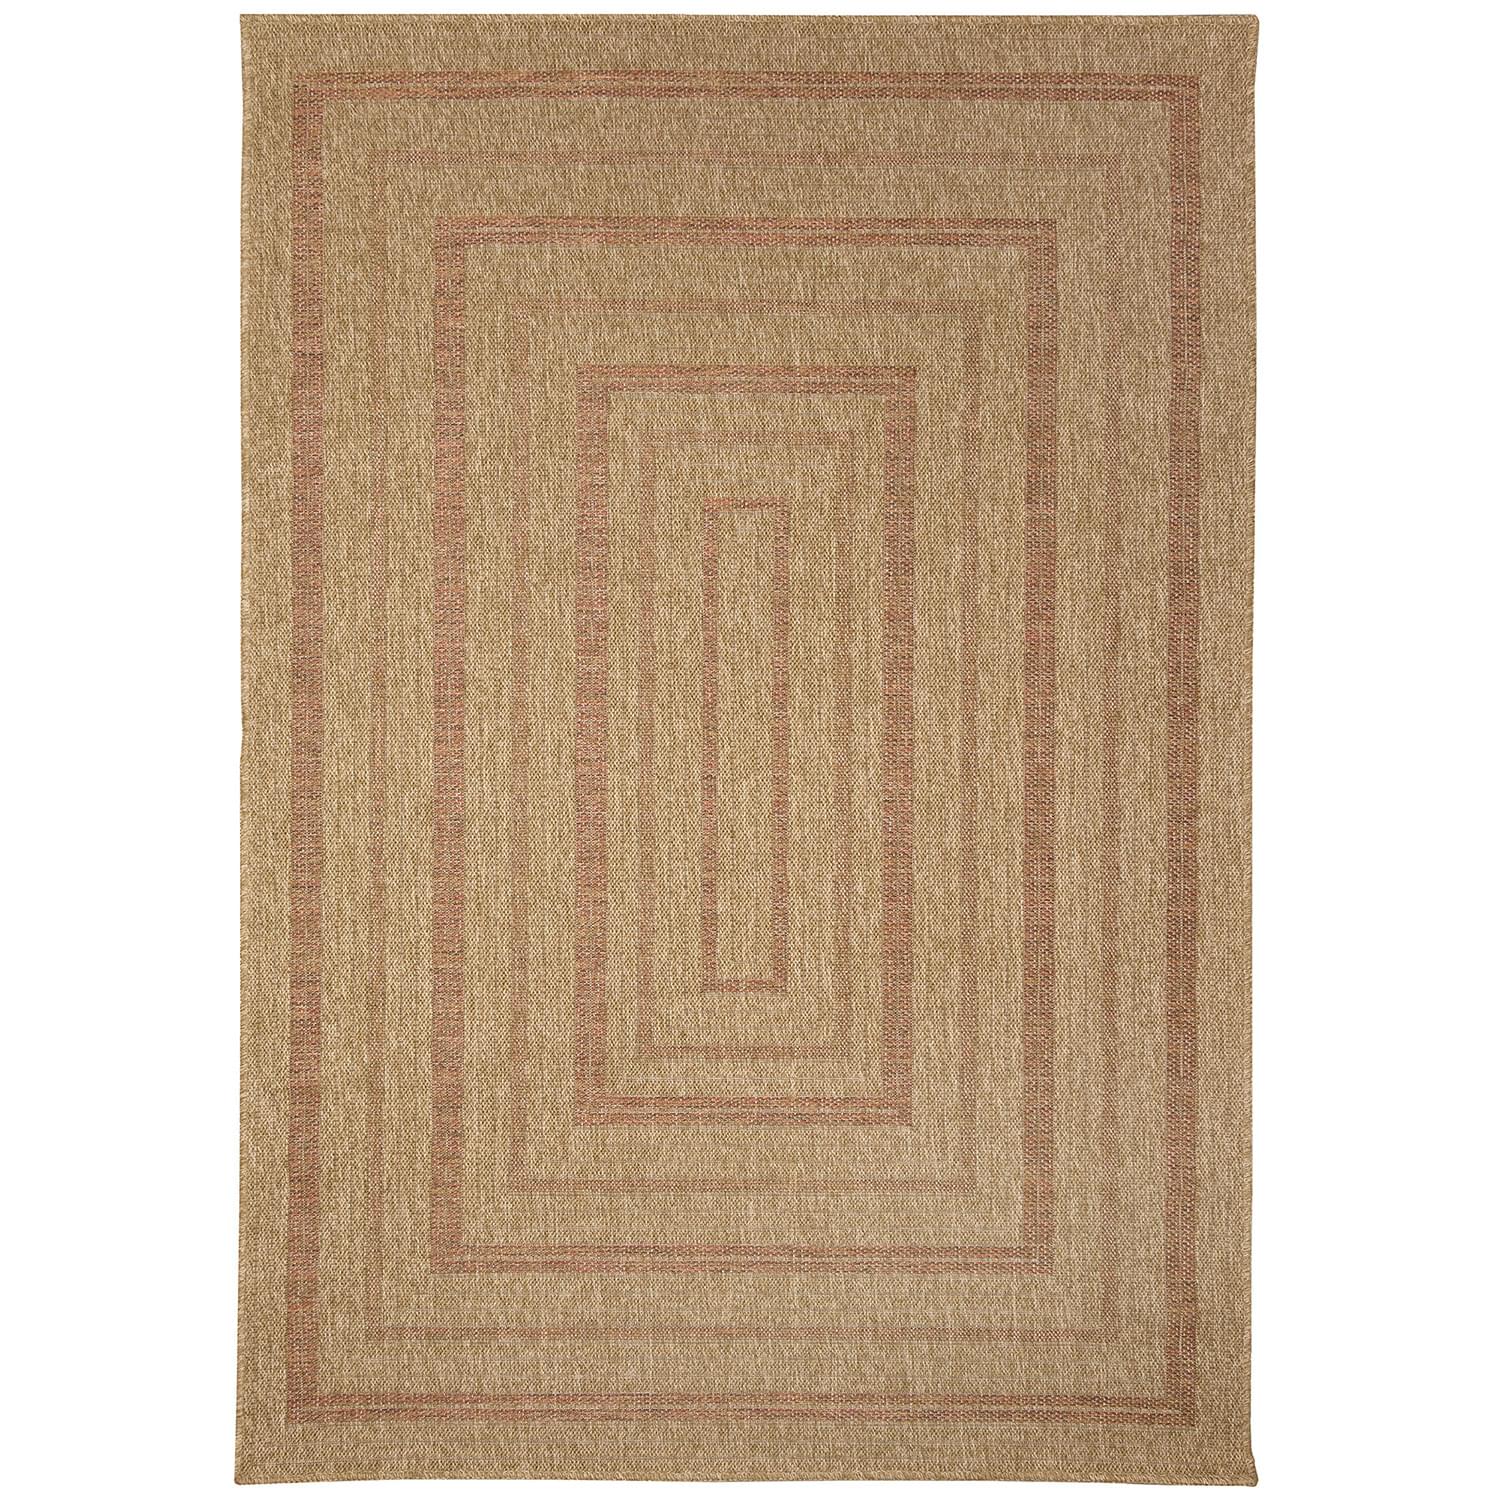 Liora Manne Sahara Low Profile  Easy Care Woven Weather Resistant Rug- Multi Border Terracotta  Product Image